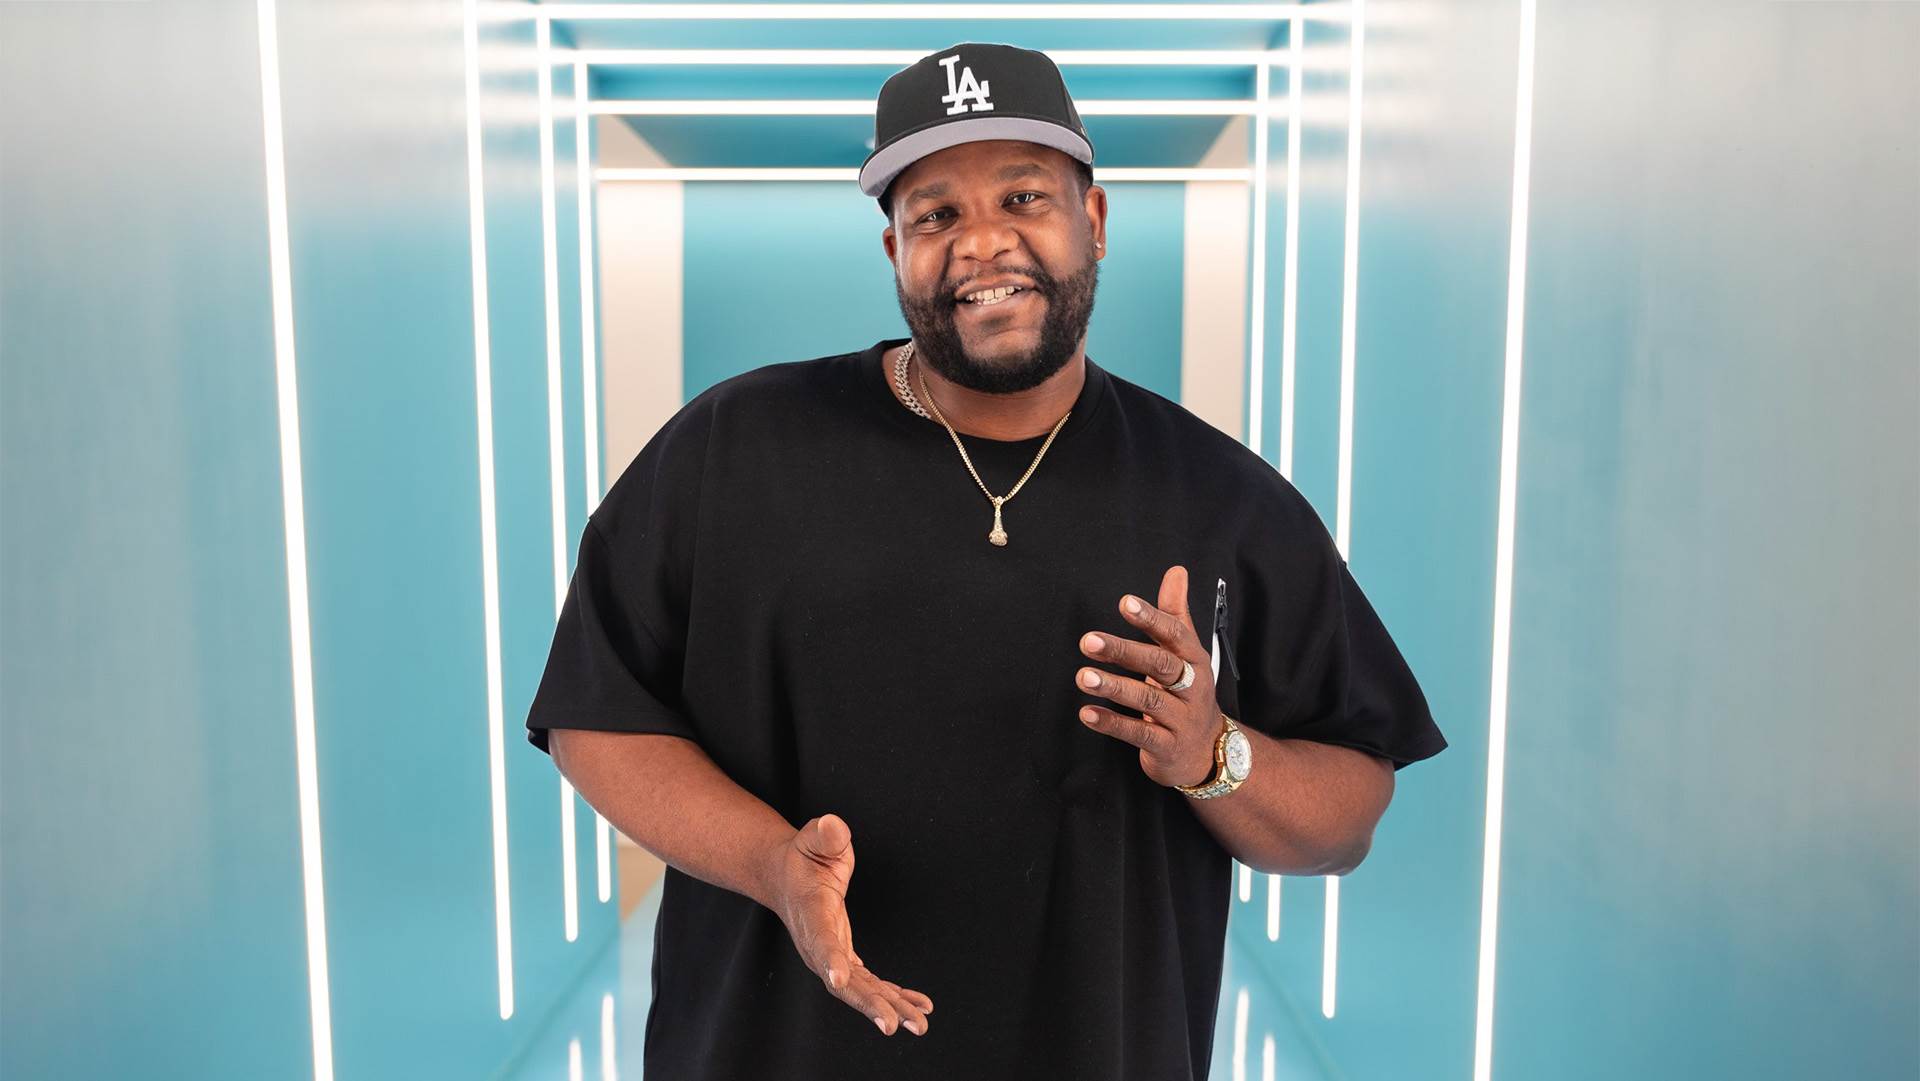 Nate Jackson, a black man with a light beard wearing a black t-shirt, gold chain and black billed cap with the LA Dodgers "LA" on it. He is smiling and standing in a light blue hallway with white lights.